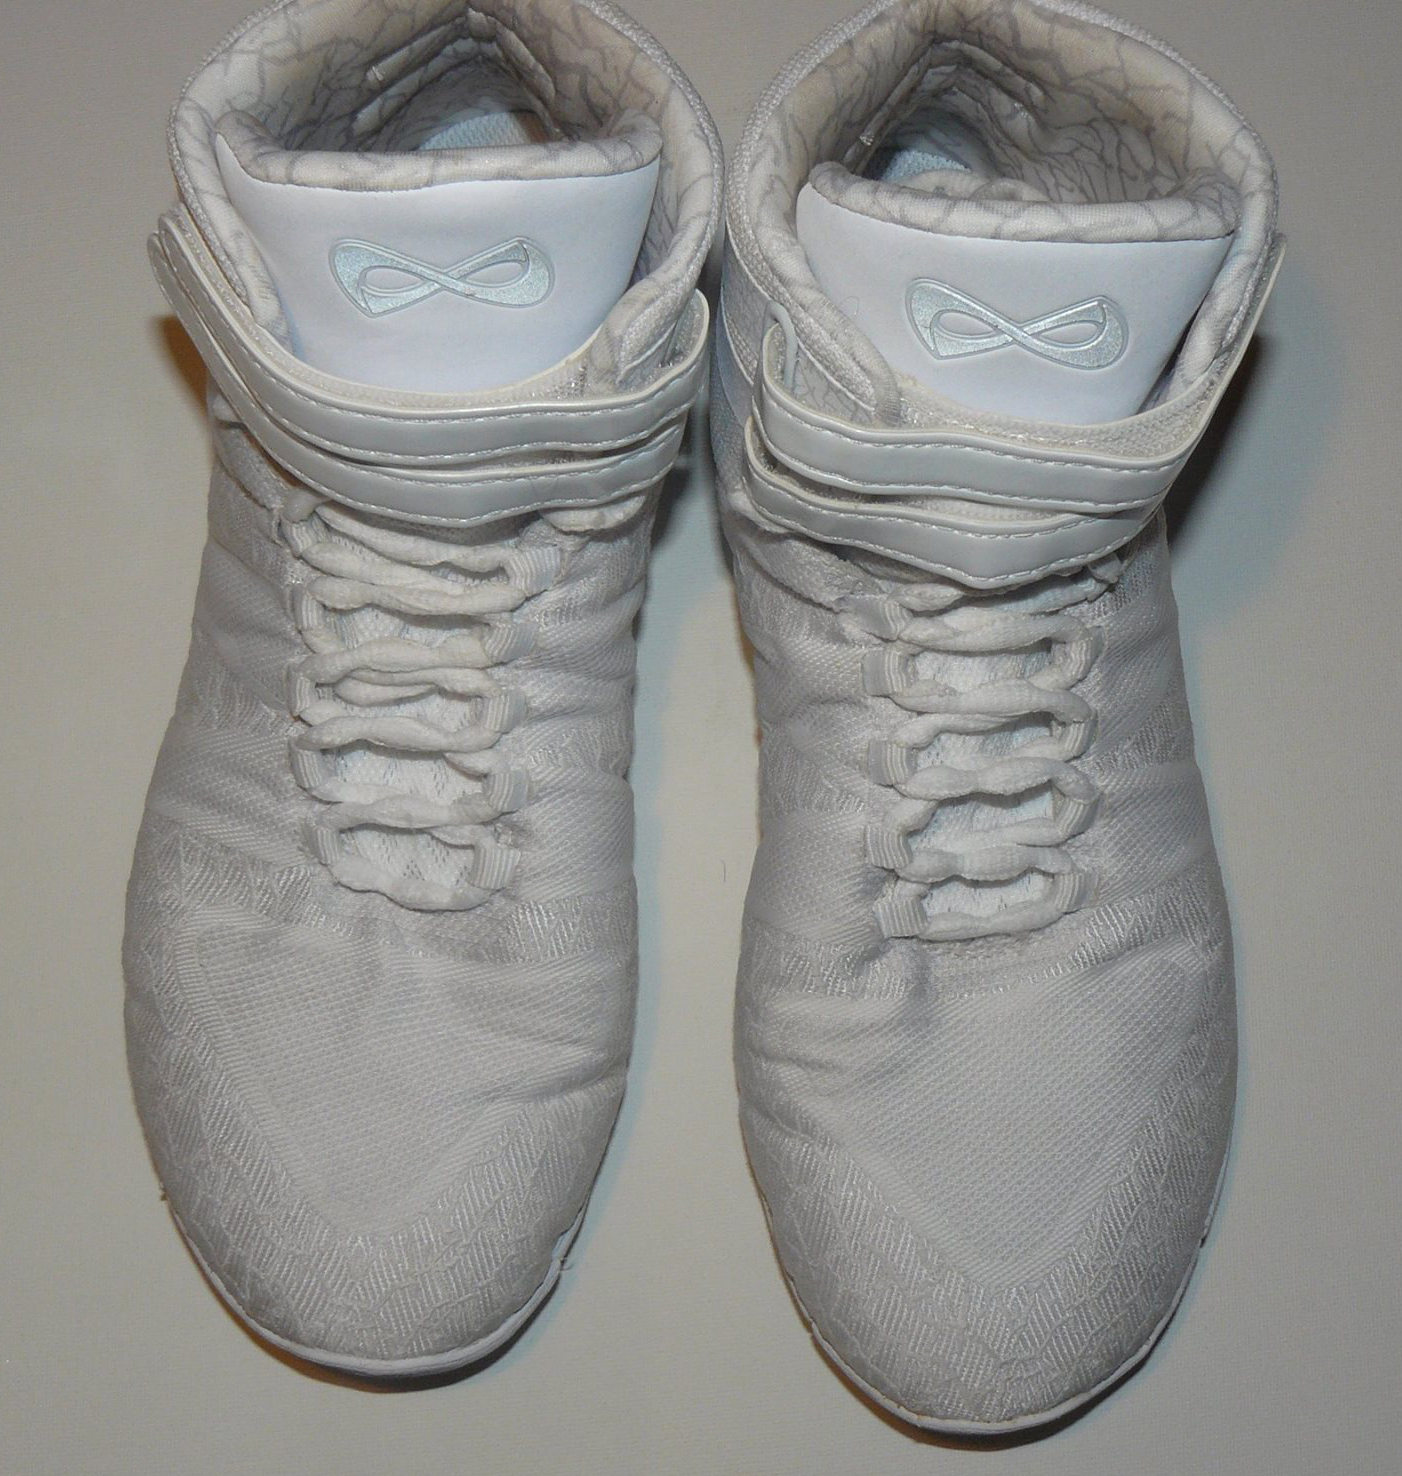 nfinity flyer shoes